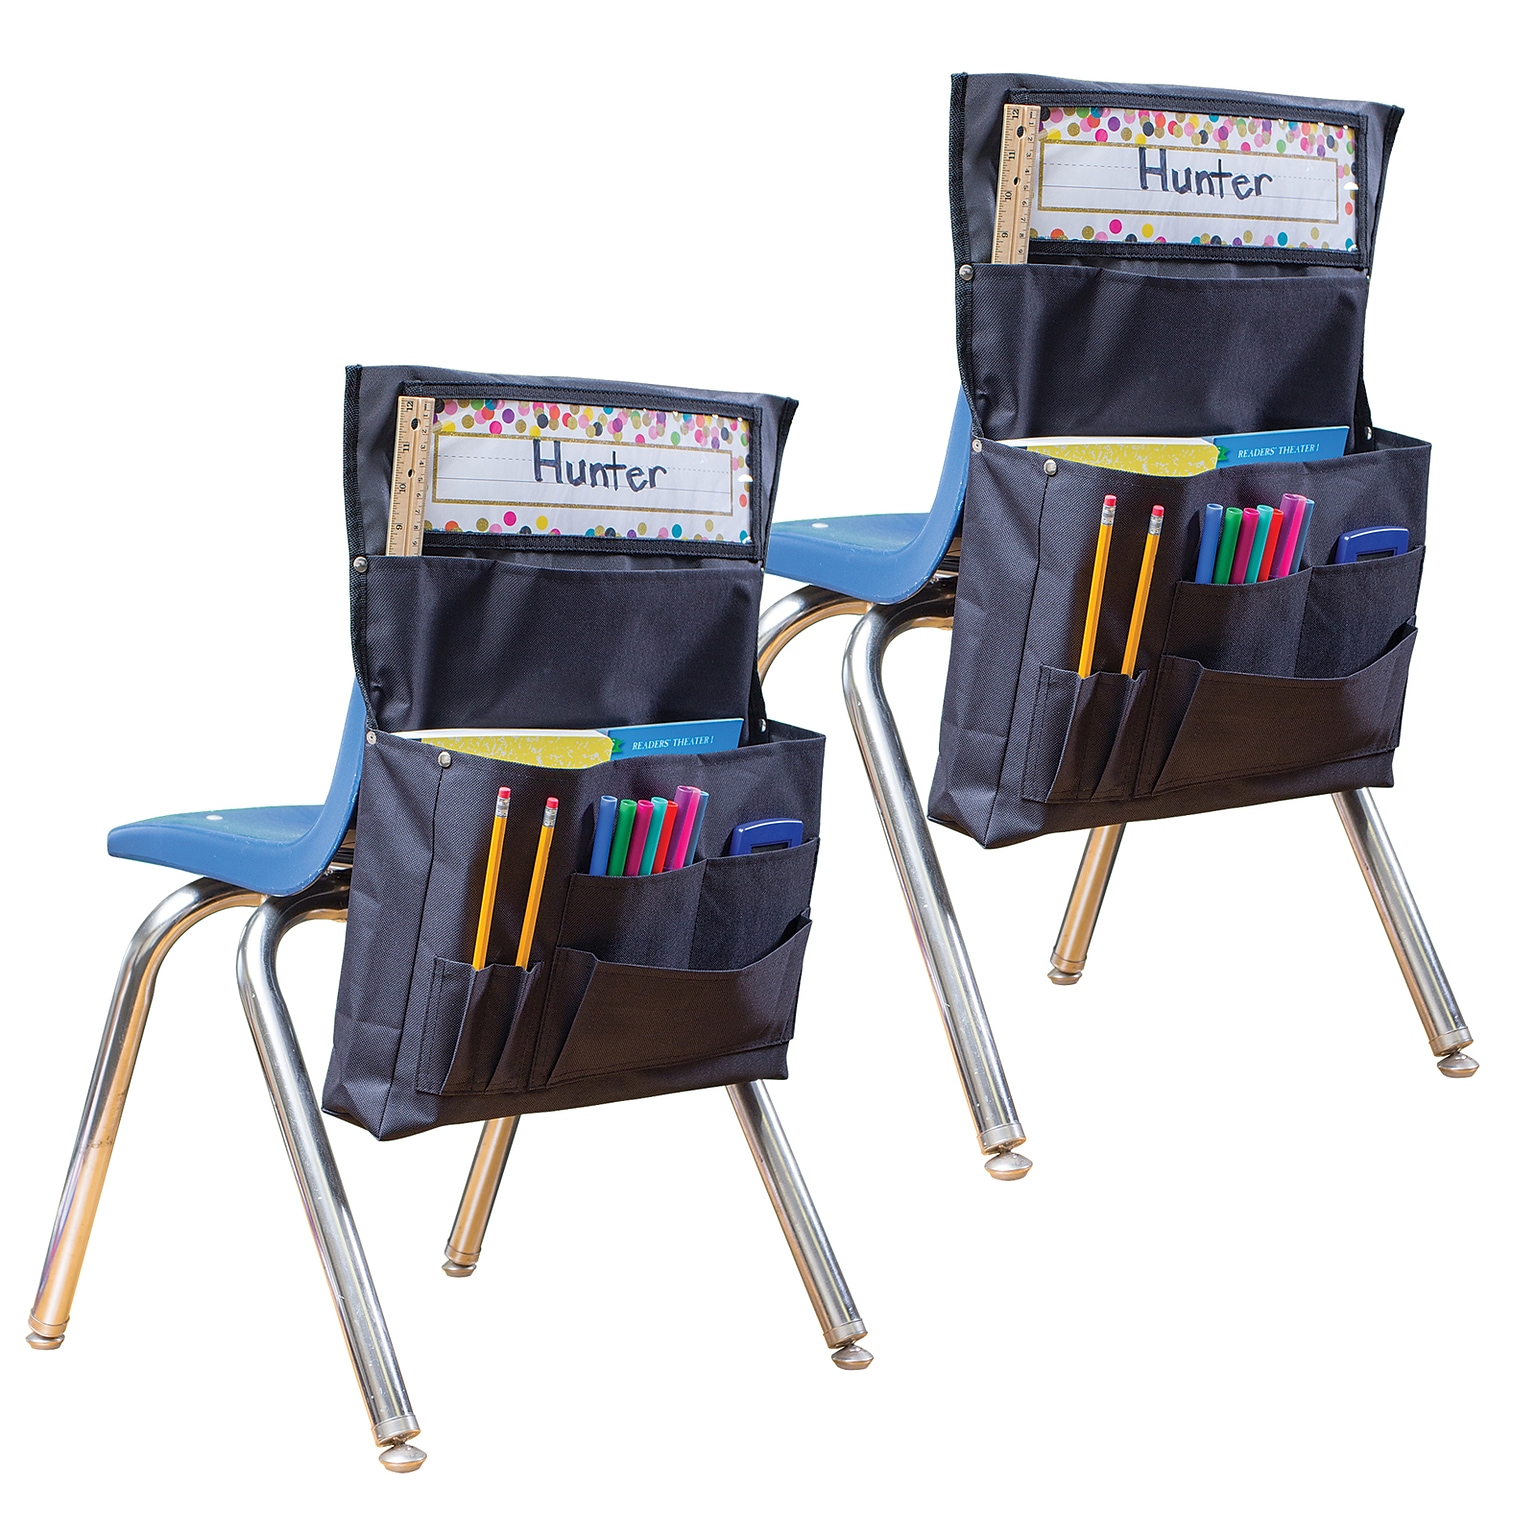 Teacher Created Resources® Canvas Chair Pocket, 15.5 x 18, Black, Pack of 2 (TCR20883-2)